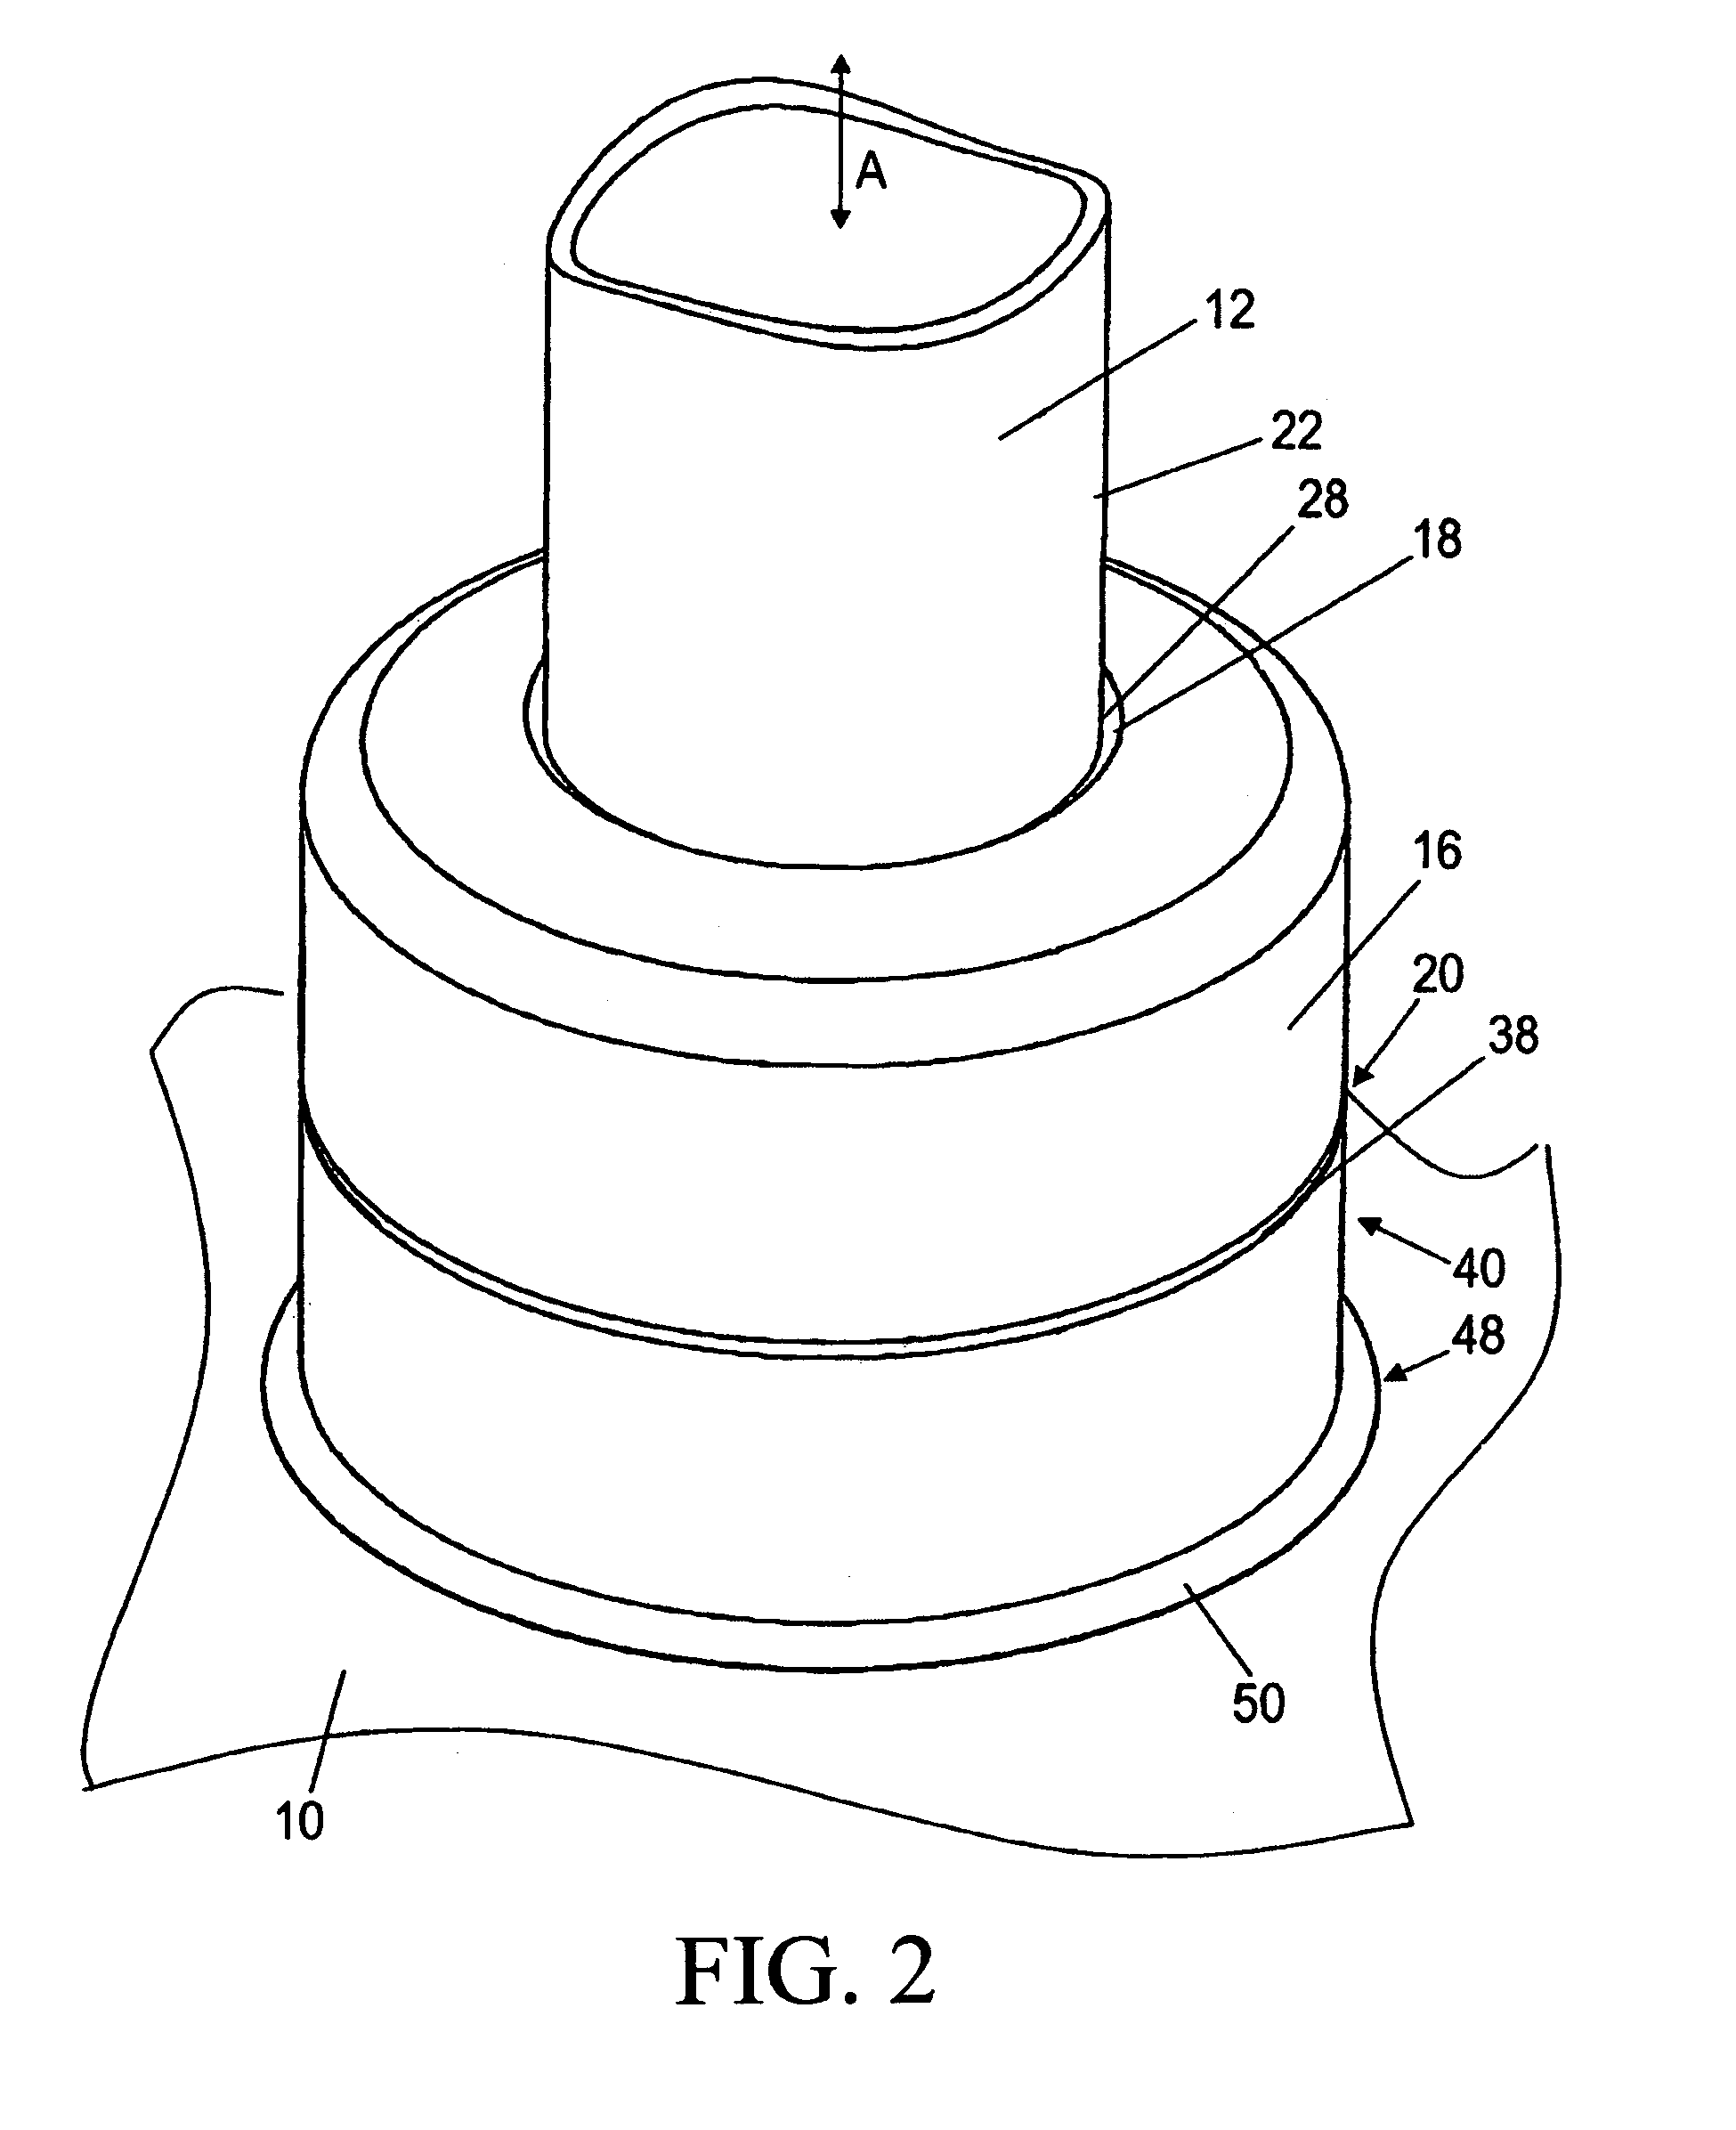 Coupling element of a support arm system